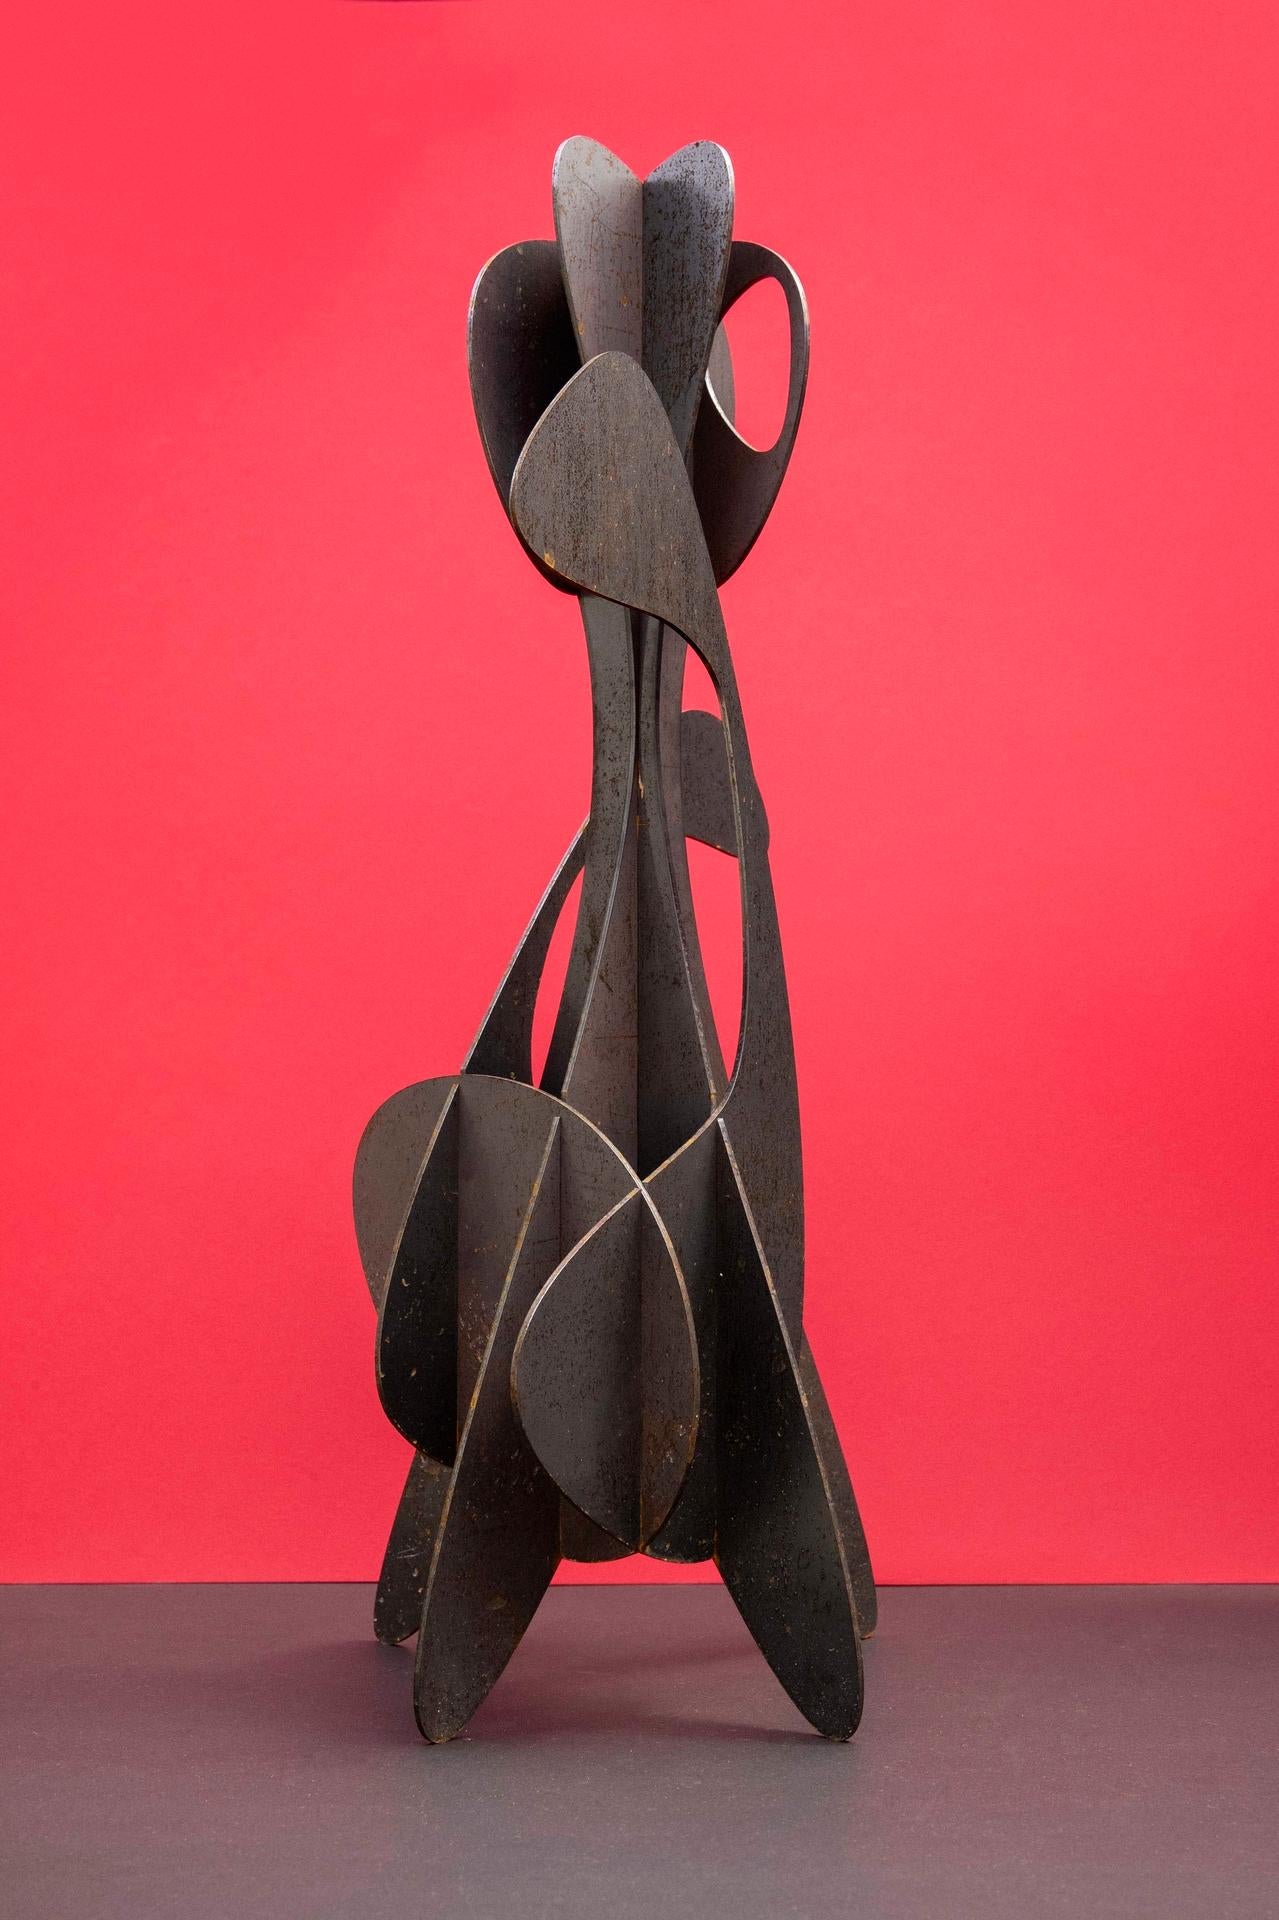 Alfil #2 is a weathering steel sculpture by contemporary artist Alejandro Vega Beuvrin, dimensions are 60 × 25 × 22 cm (23.6 × 9.8 × 8.7 in). 
The sculpture is signed and numbered, it is part of a limited edition of 5 editions + 3 artist’s proofs,